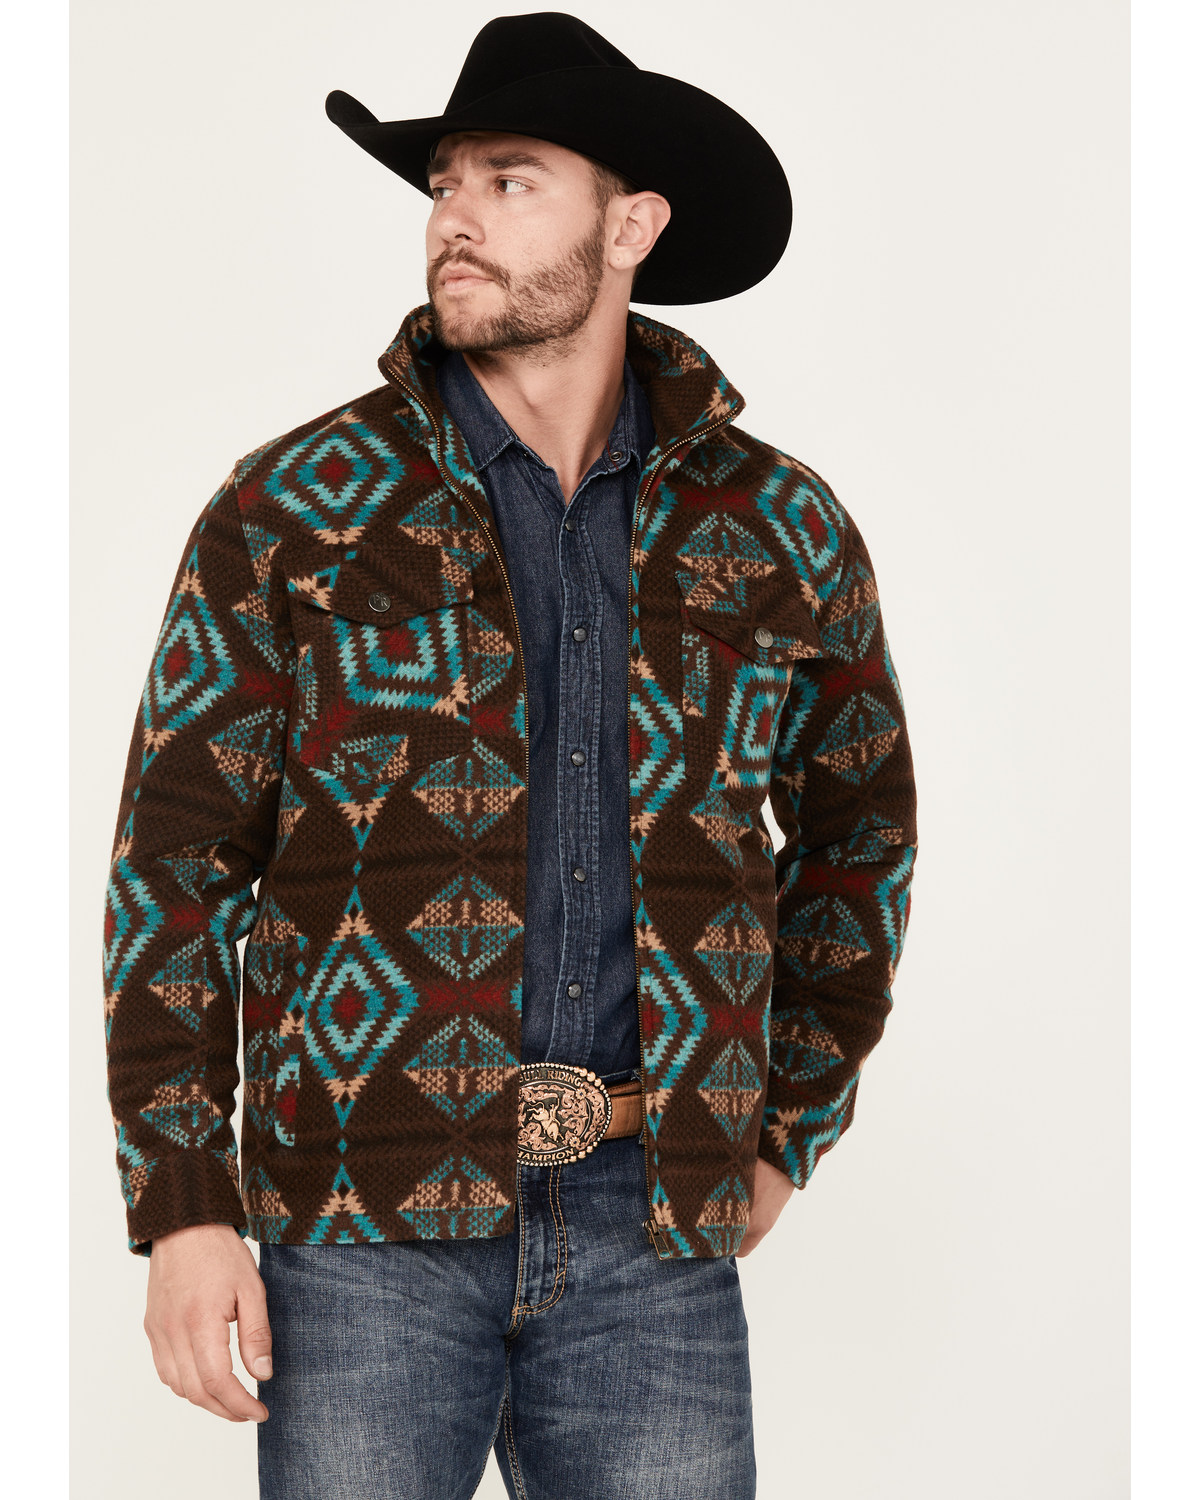 Powder River Outfitters by Panhandle Men's Wool Multicolor Zip Snap Jacket